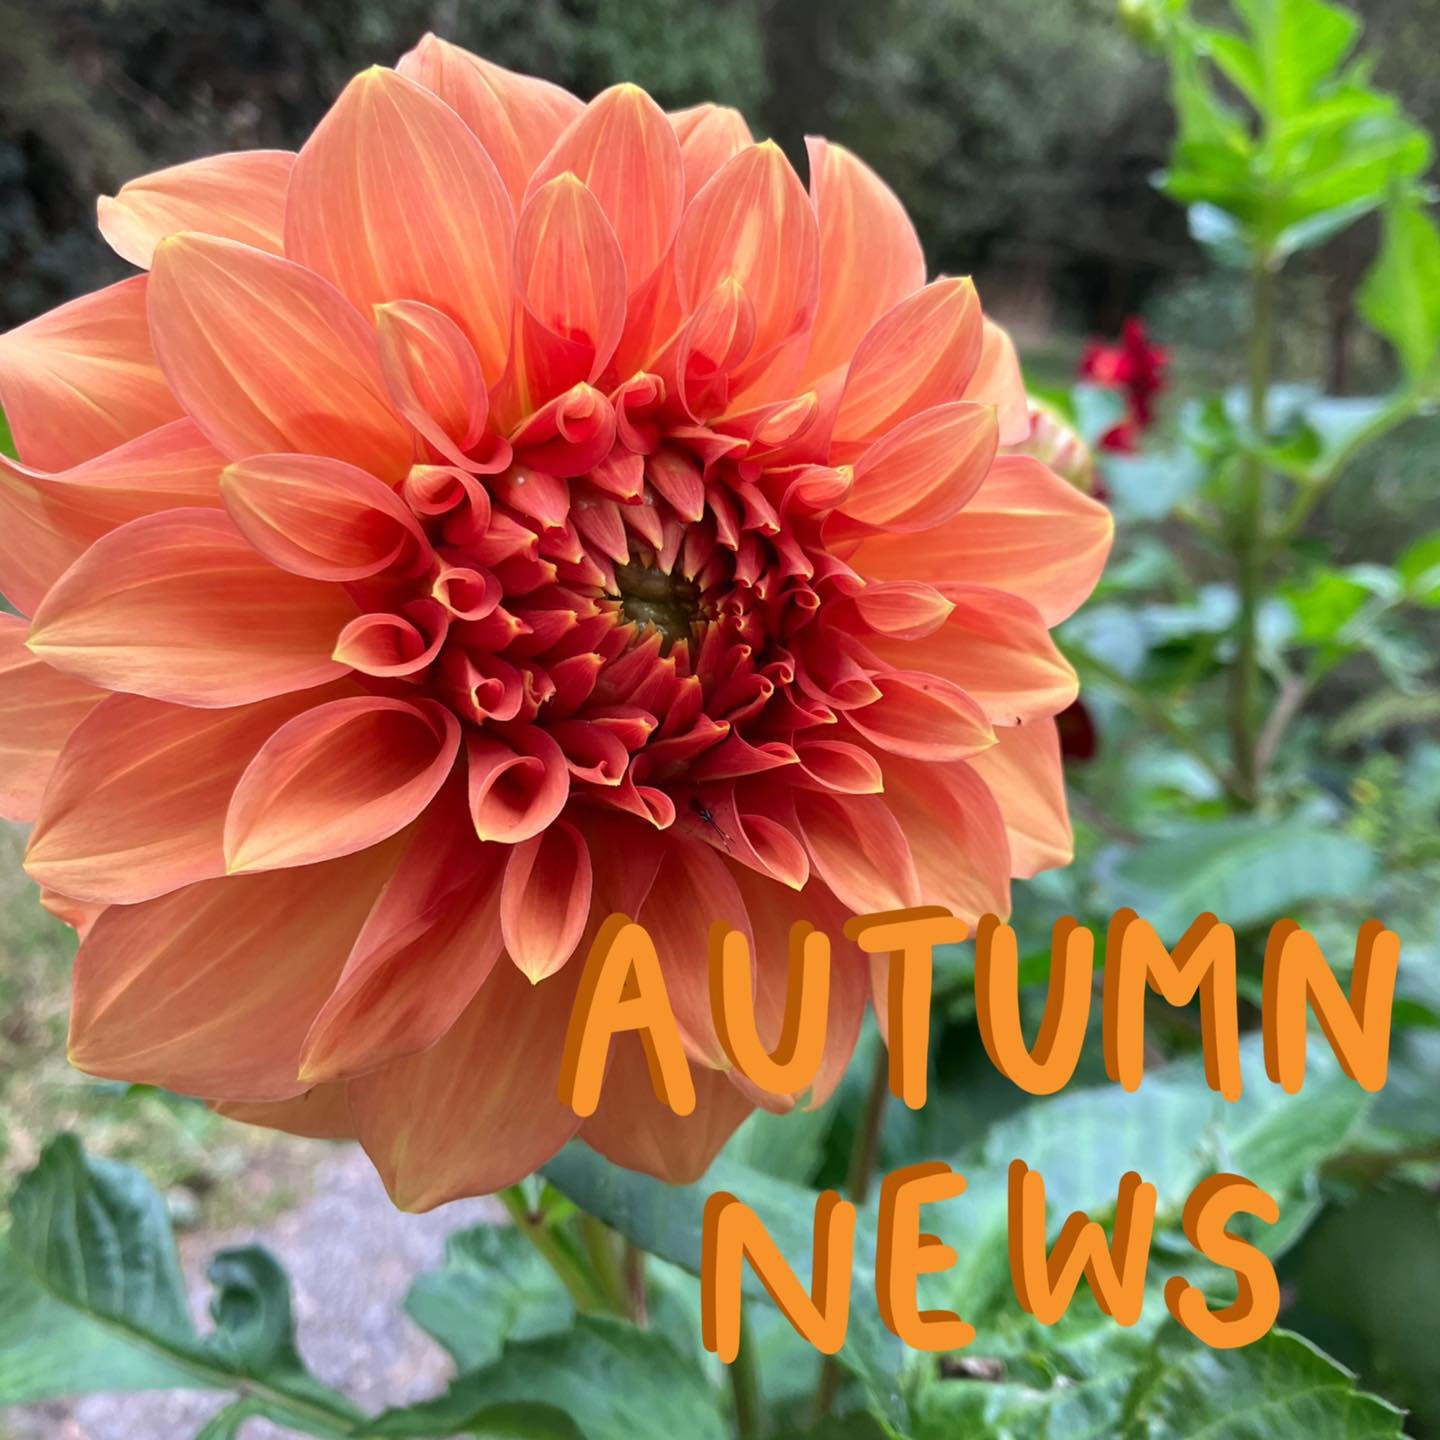 AUTUMN NEWSLETTER - In this issue of our newsletter, you will also find a submission guide for the proposed Fast-track consenting Bill, a member spotlight on Alison Bentley of @tikitere_farm, a decadent seasonal recipe, the latest land listings, and 